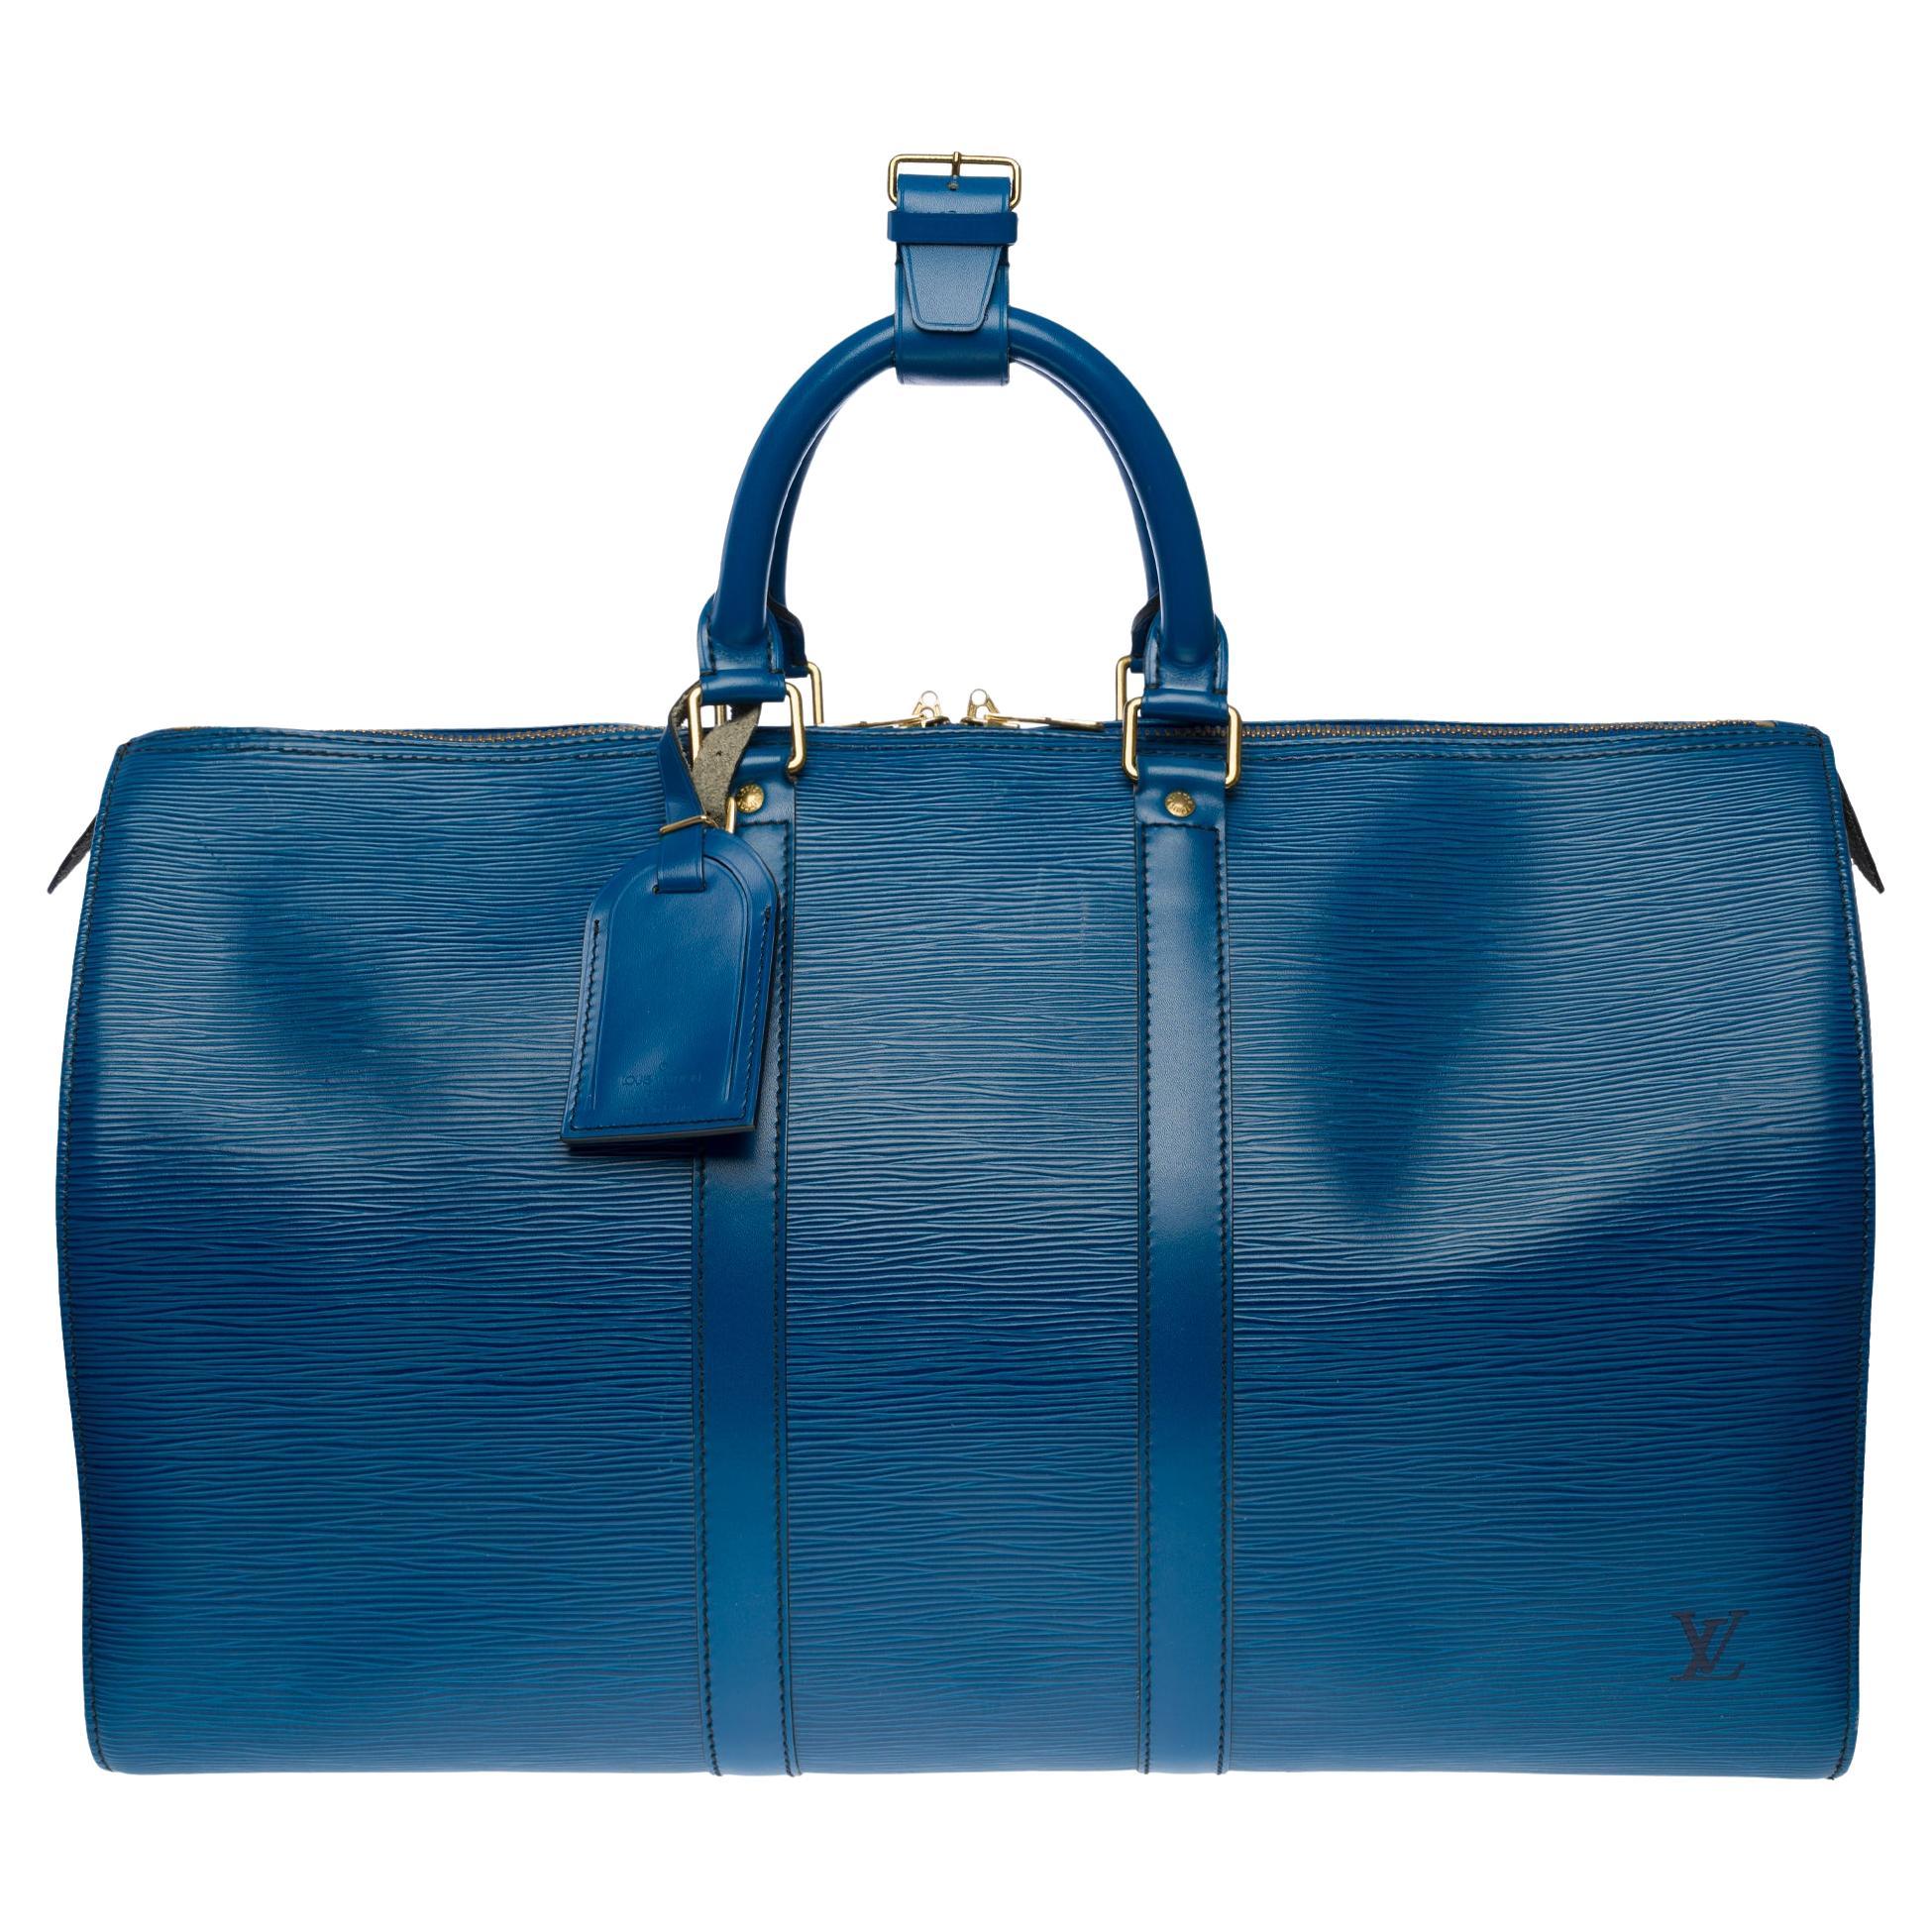 The very Chic Louis Vuitton Keepall 45 Travel bag in blue épi